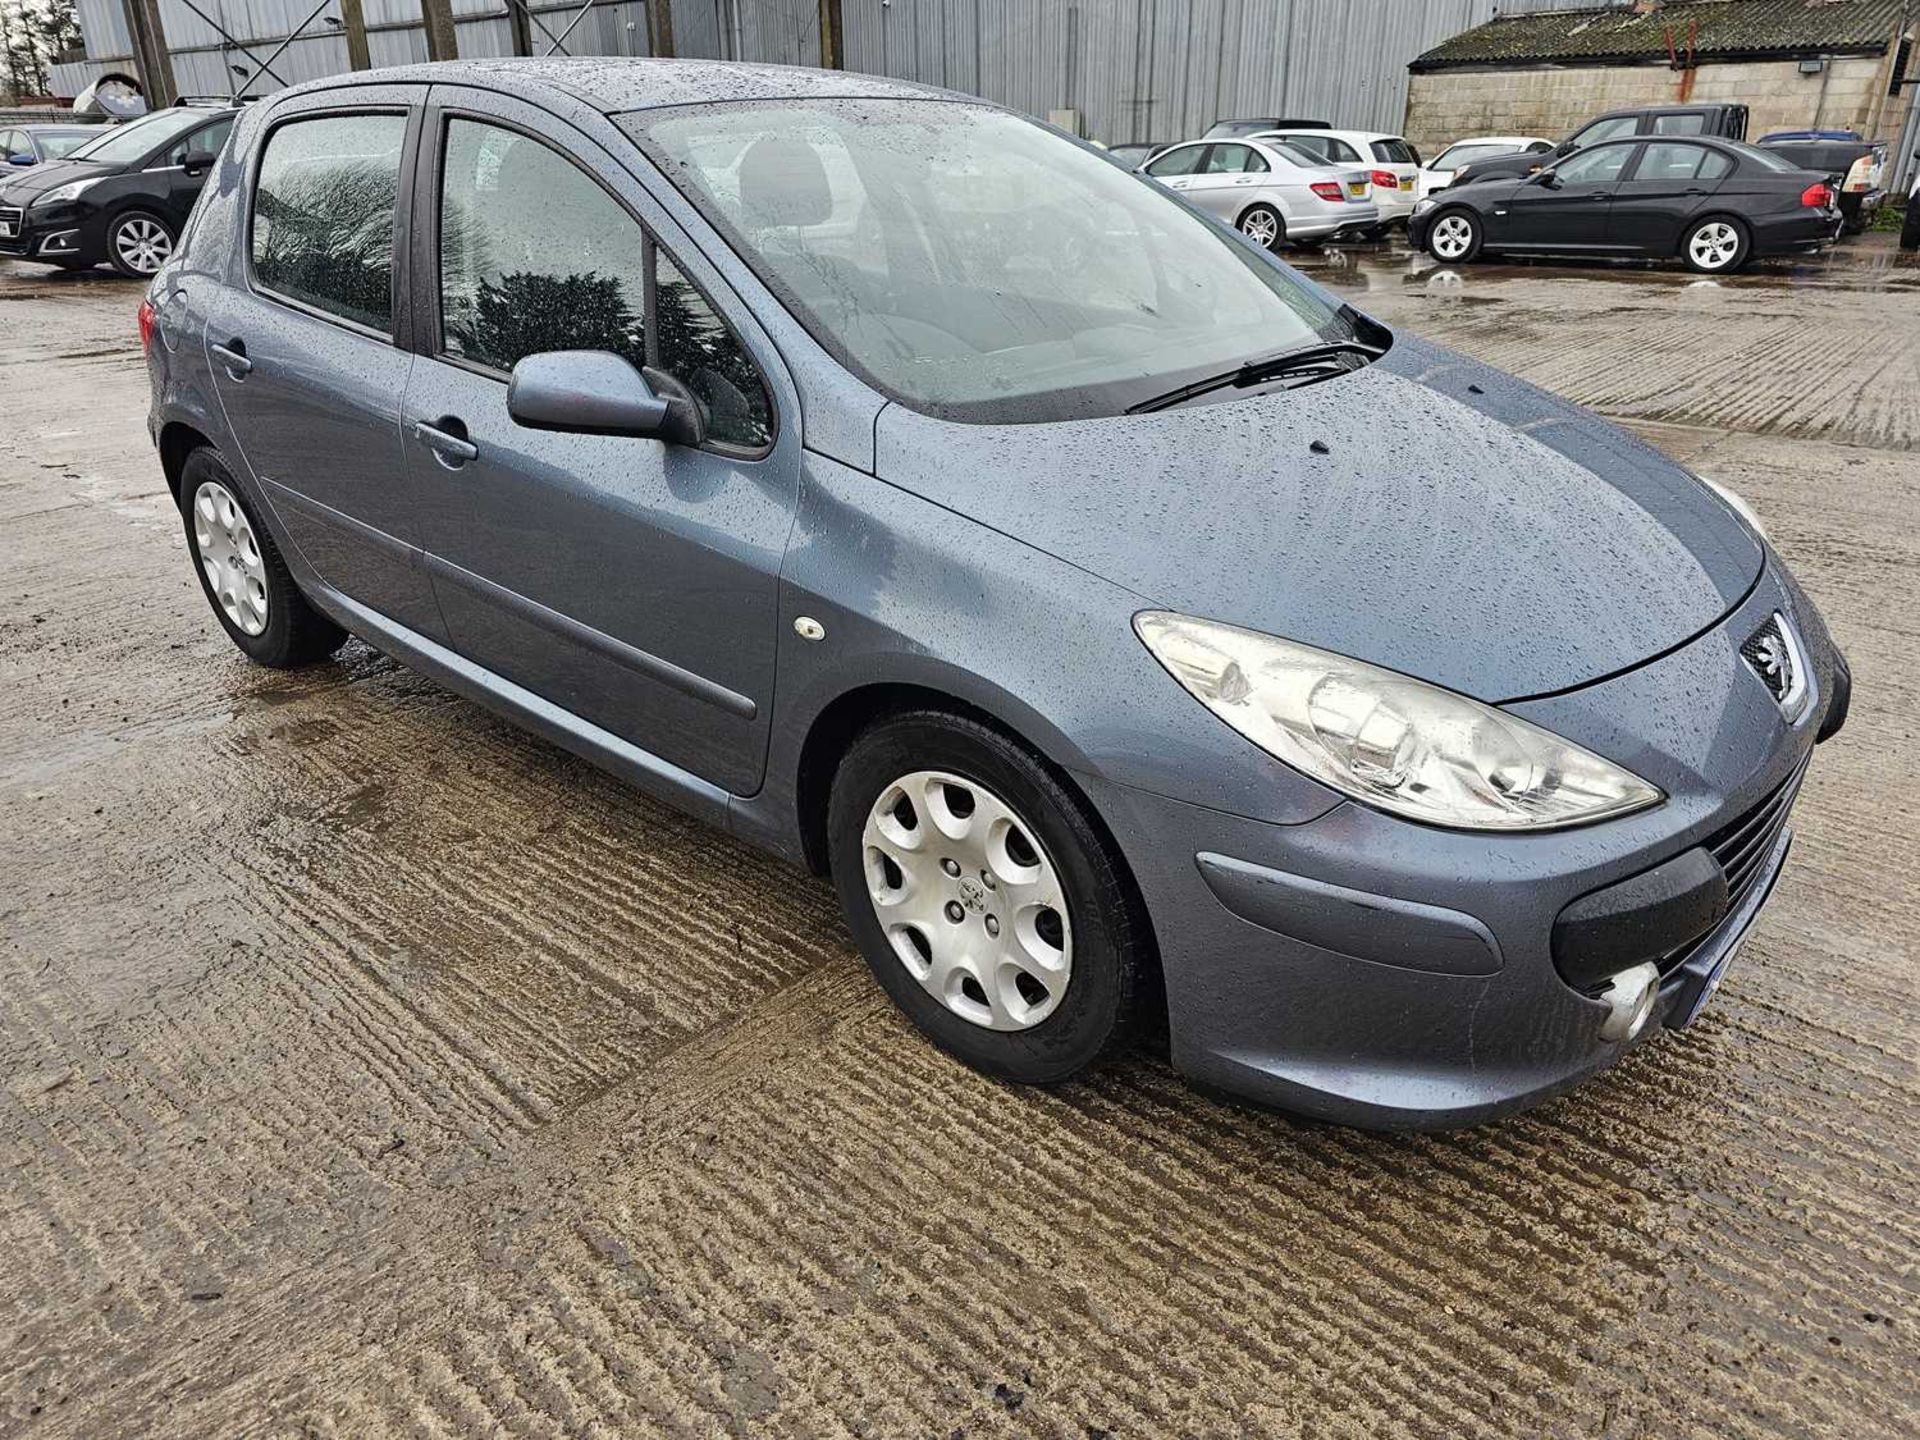 2007 Peugeot 307 X-line, 5 Speed, A/C (Reg. Docs. Available, Tested 11/24) - Image 8 of 28